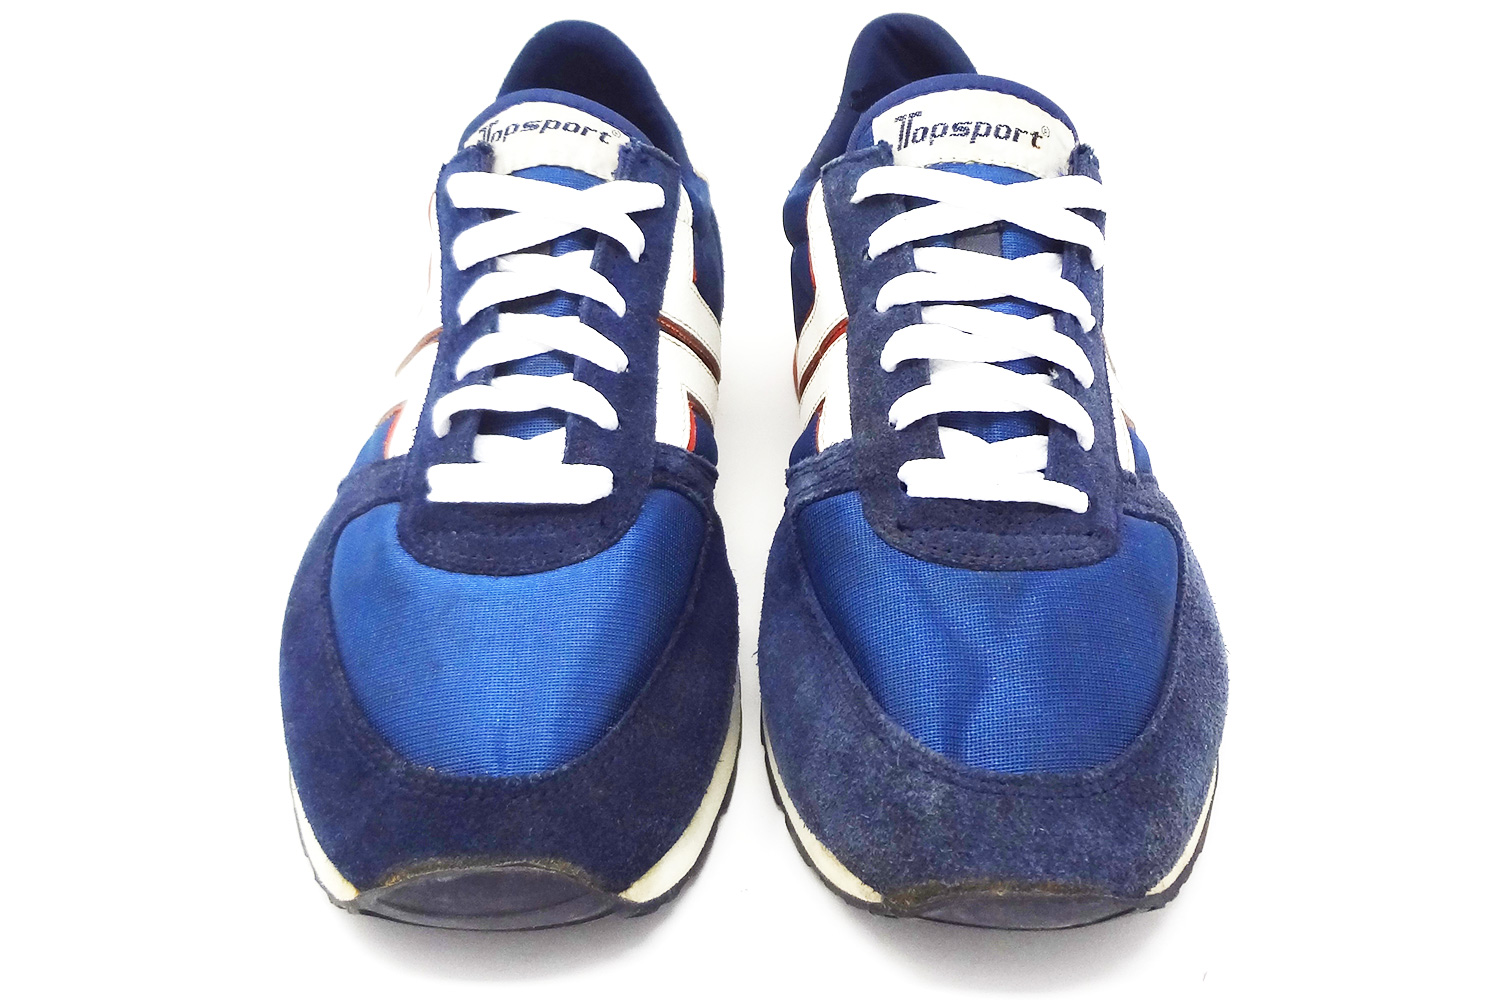 The Deffest®. A vintage and retro sneaker blog. — Topsport 80s vintage ...